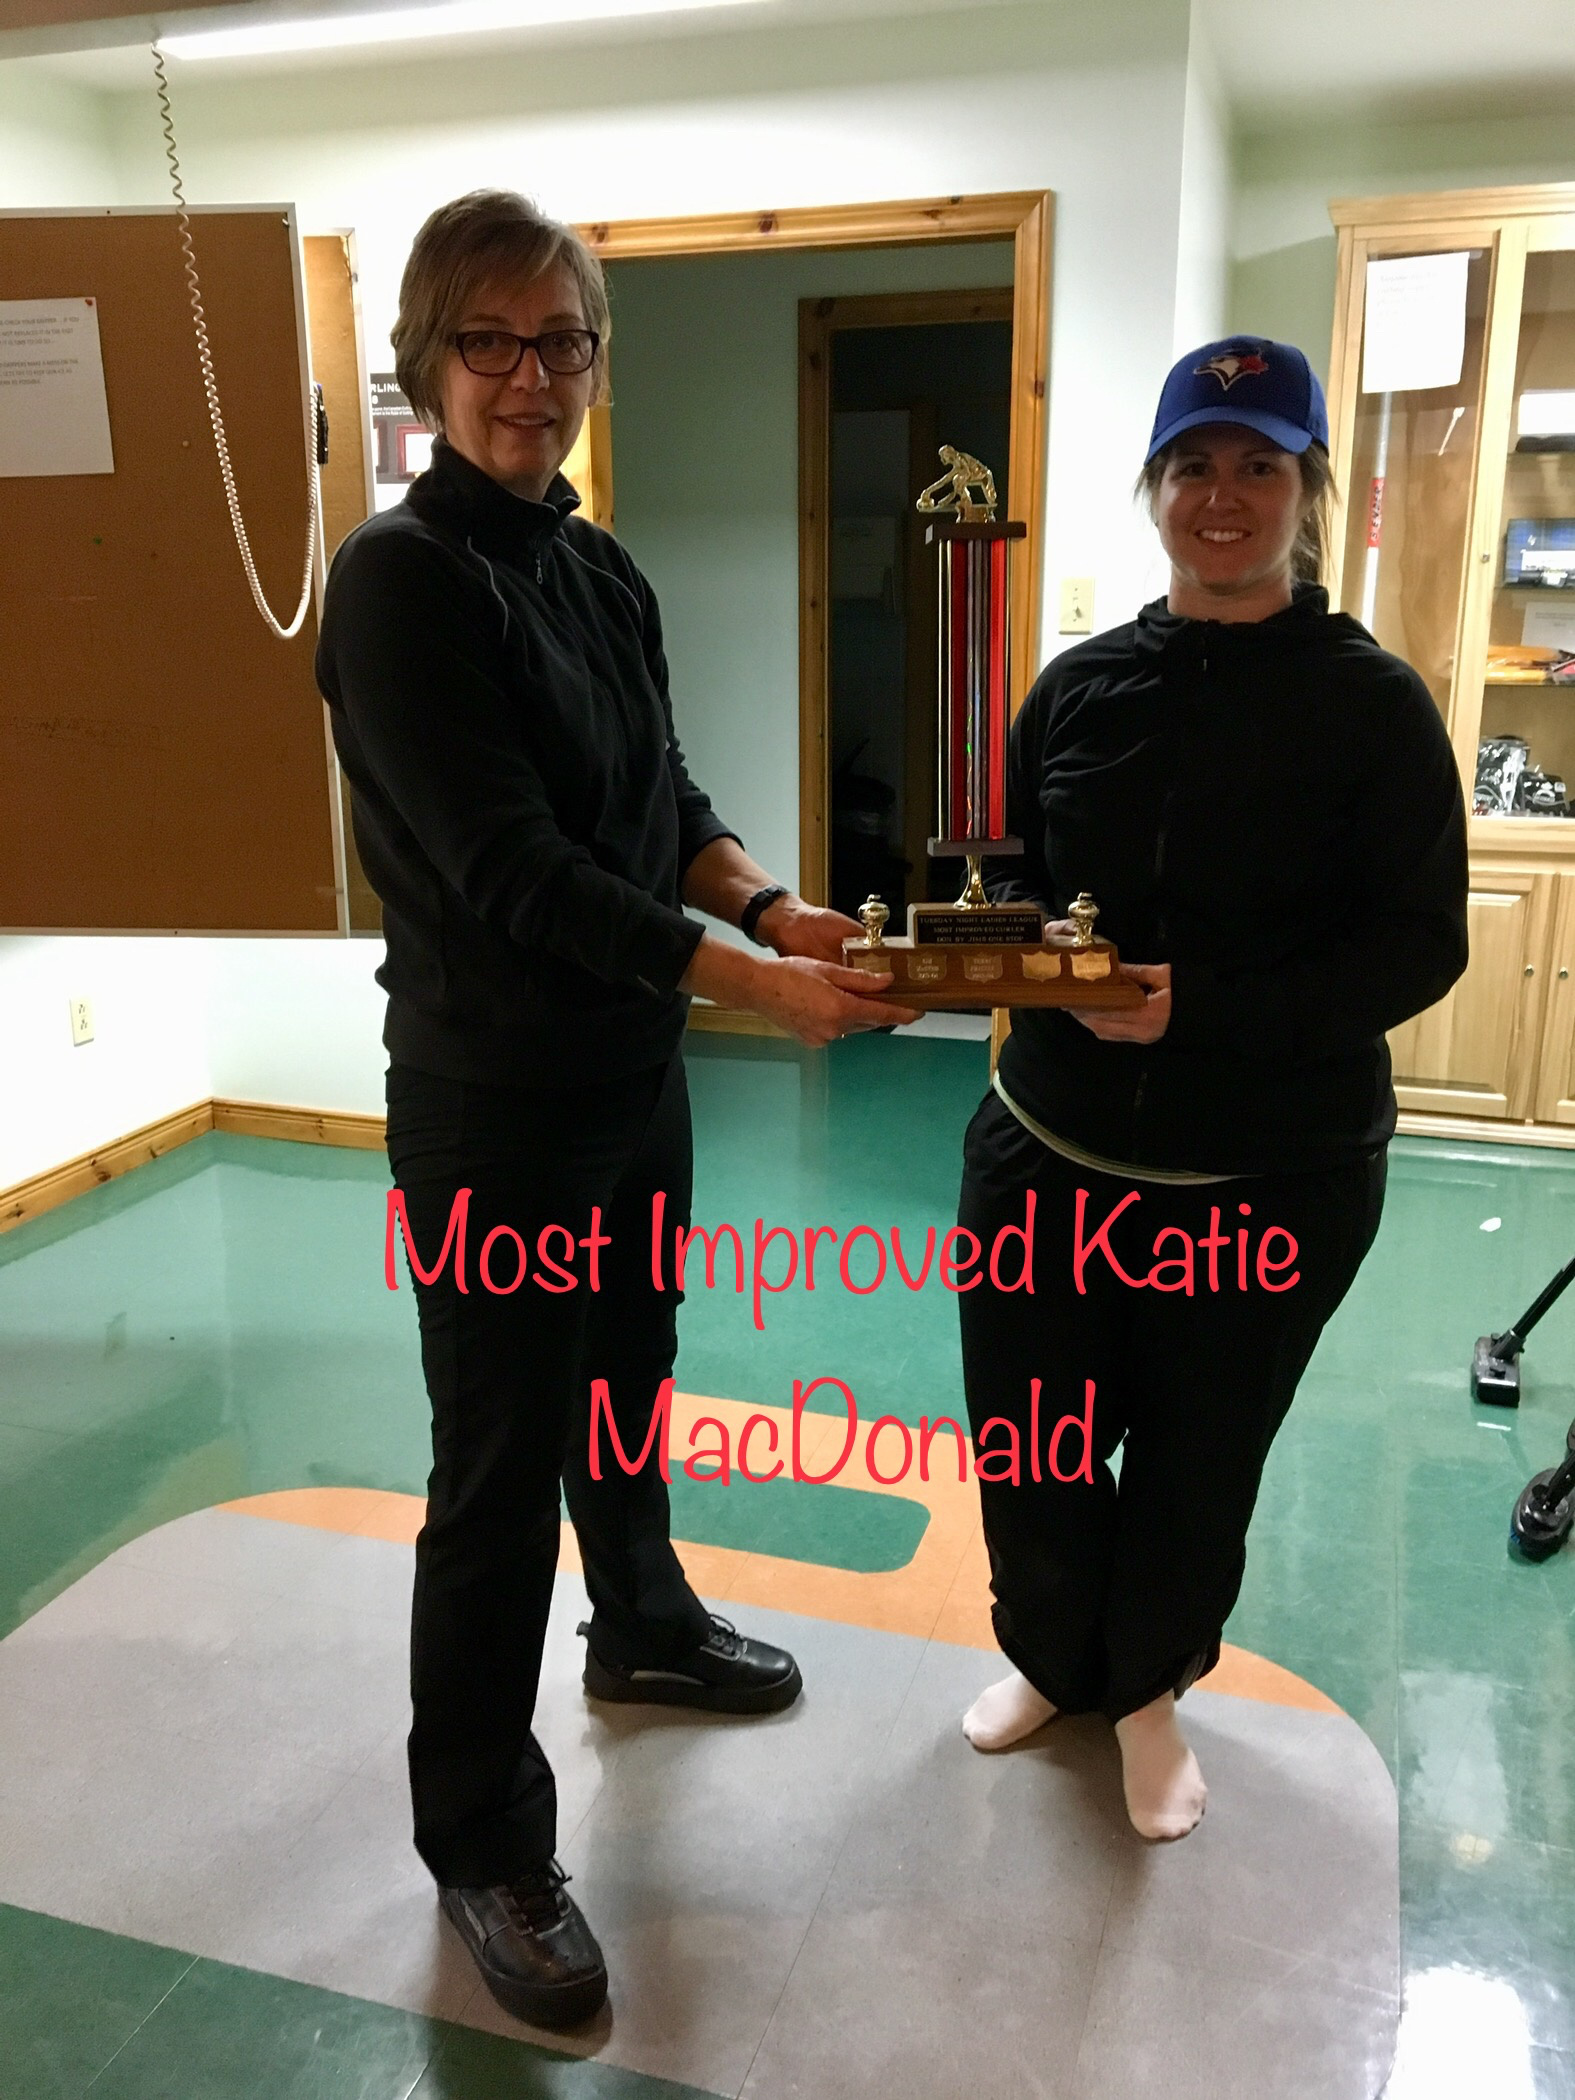 Tuesday Night Ladies Most Improved: Katie MacDonald (right)
Presented by Annette Daemen (left)